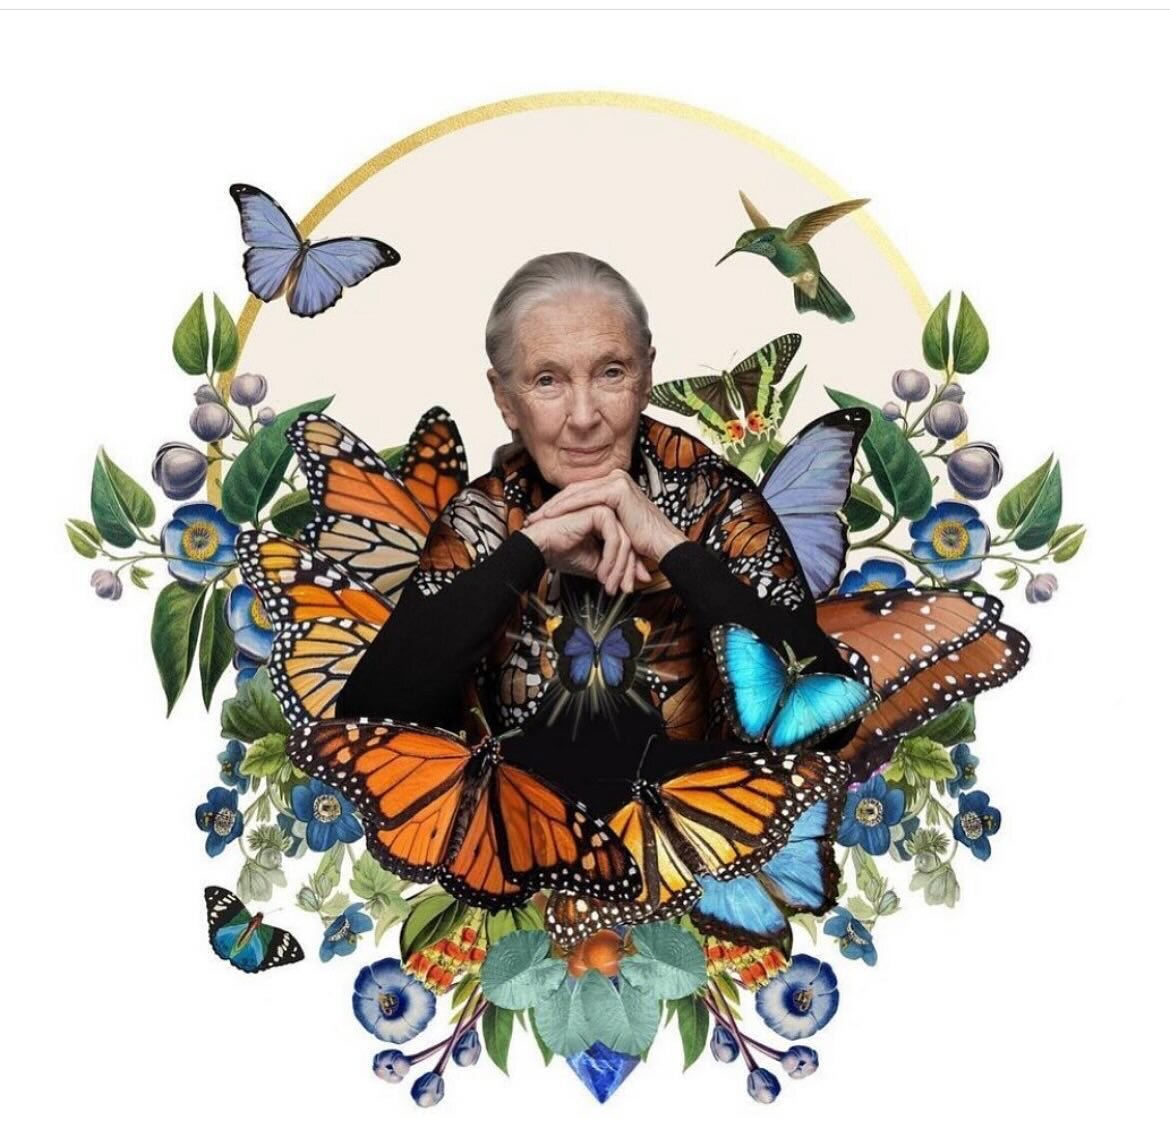 Happy 90th Birthday Jane Goodall! In honor of Jane&rsquo;s 90th birthday today, let&rsquo;s make her smile by doing acts of kindness, whether big or small, such as donating your time or resources, participating in community clean-ups, and more. ❤️ #h